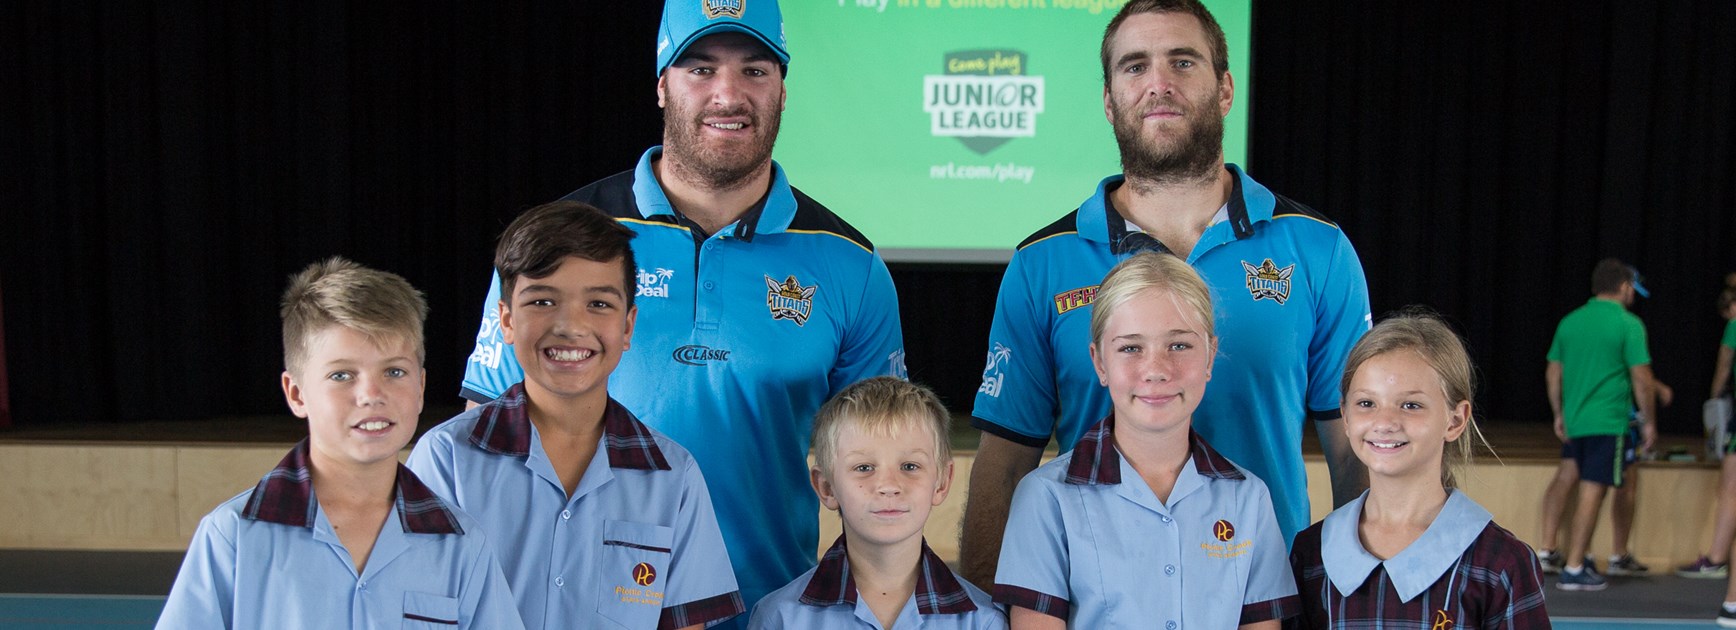 VIDEO: Players deliver NRL Wellbeing Program